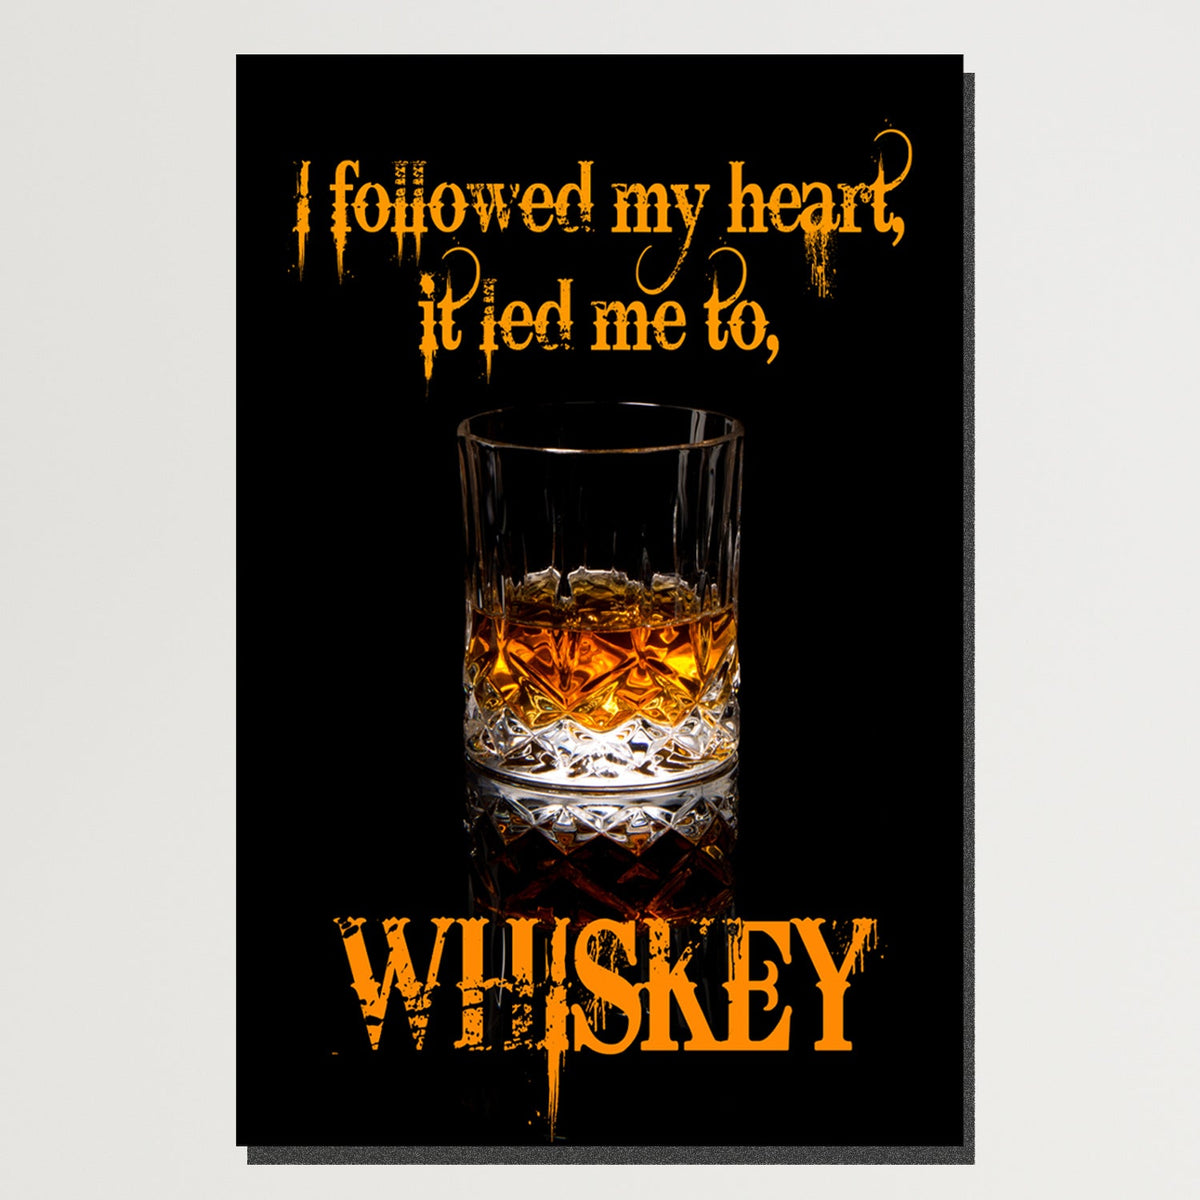 https://cdn.shopify.com/s/files/1/0387/9986/8044/products/WhiskeyQuoteCanvasArtprintStretched-Plain.jpg